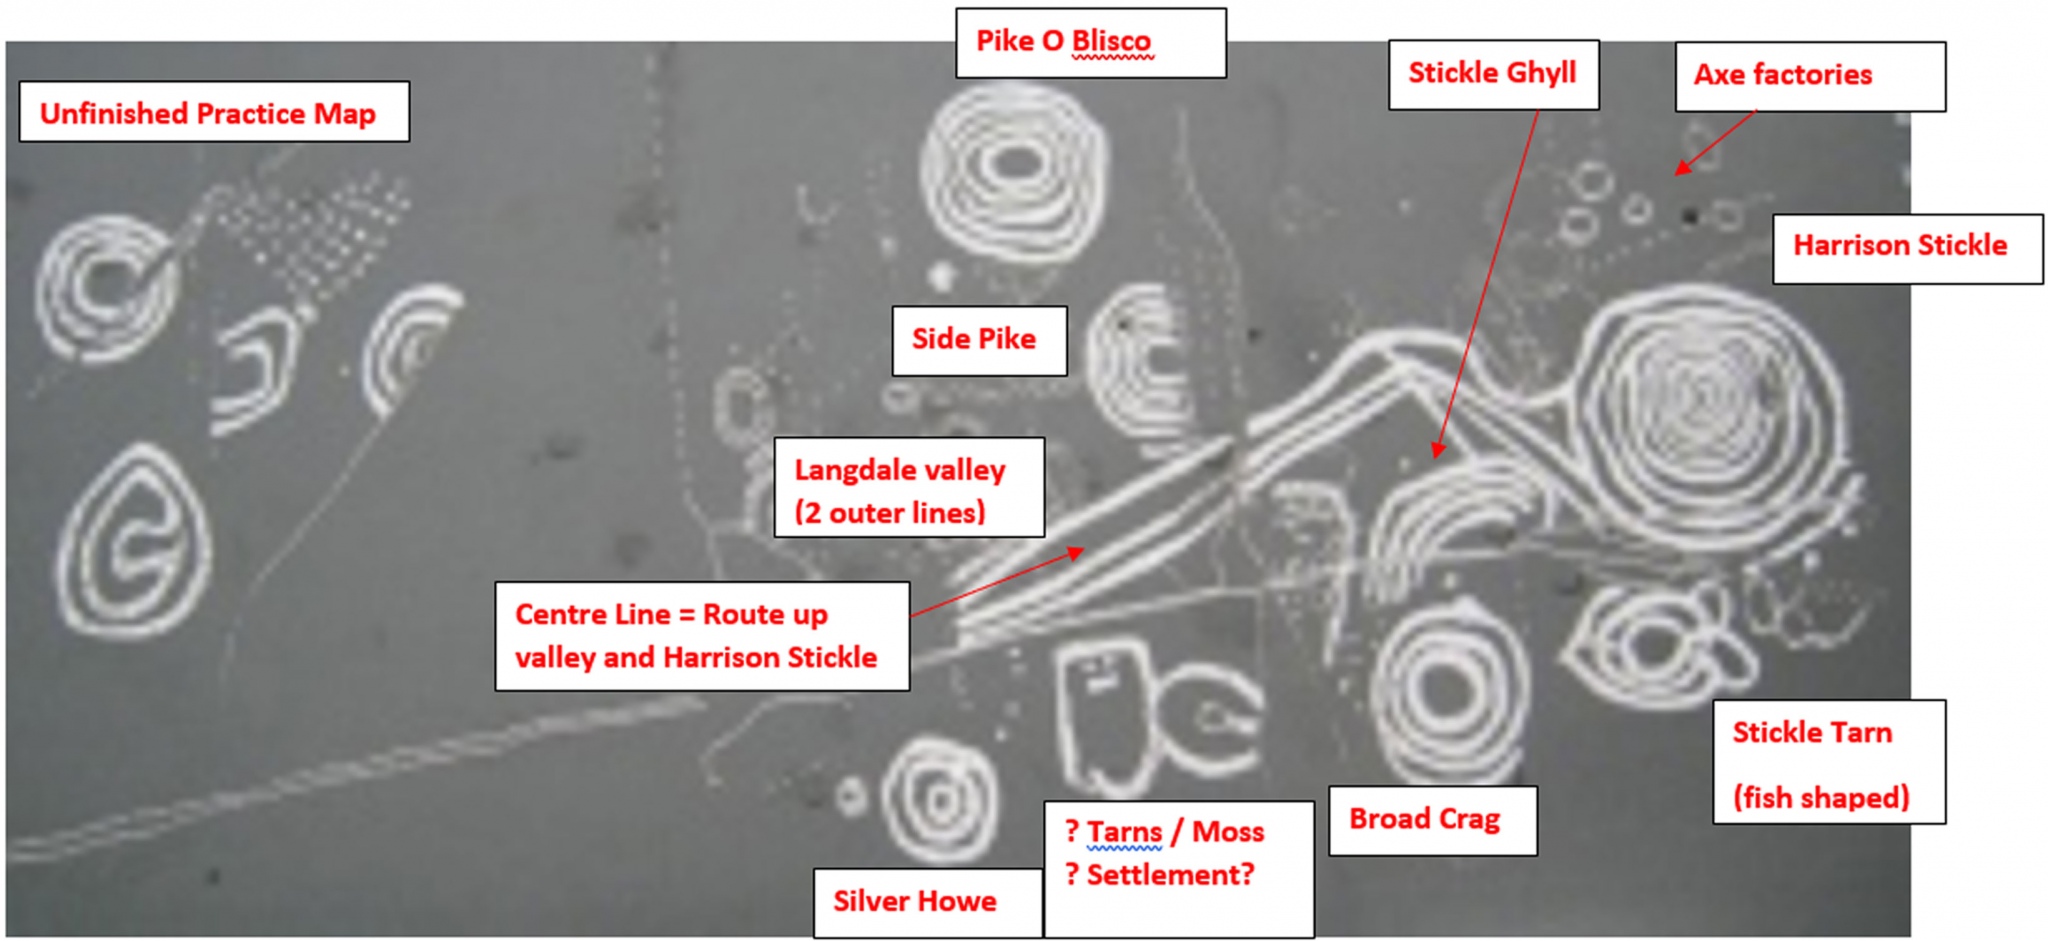 Annotated copy of the Copt Howe site sign, which no longer exists but was submitted by Drew Parsons in  in 2013, showing similarities between the engraved marks on the boulder and the geography of Great Langdale as viewed from the site
